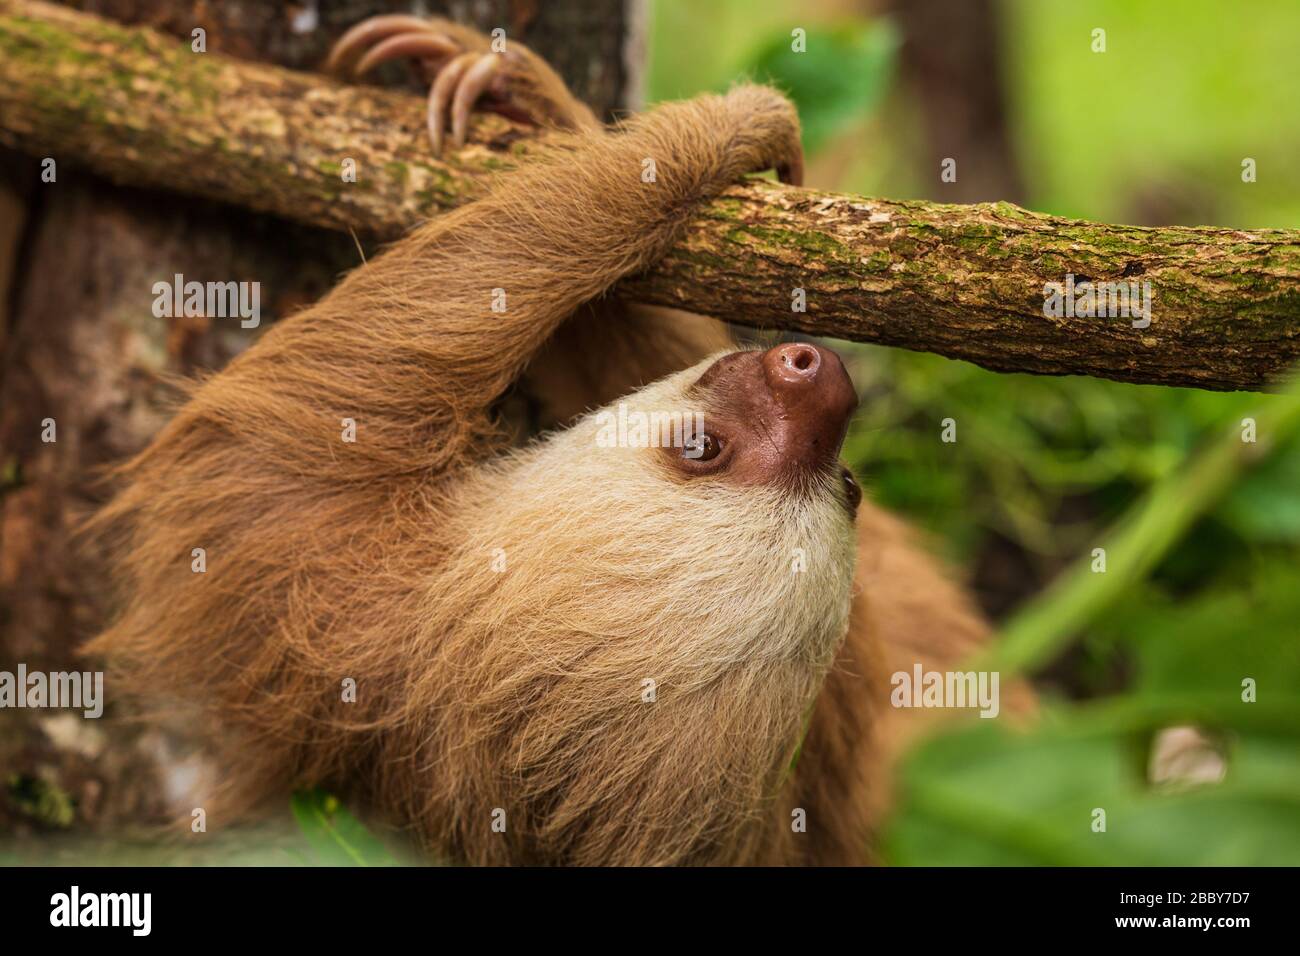 Two-toed Sloth (Choloepus hoffmanni) climbing on a branch at the Jaguar Rescue Center in Puerto Viejo de Talamanca in Limon Province, Costa Rica. Stock Photo